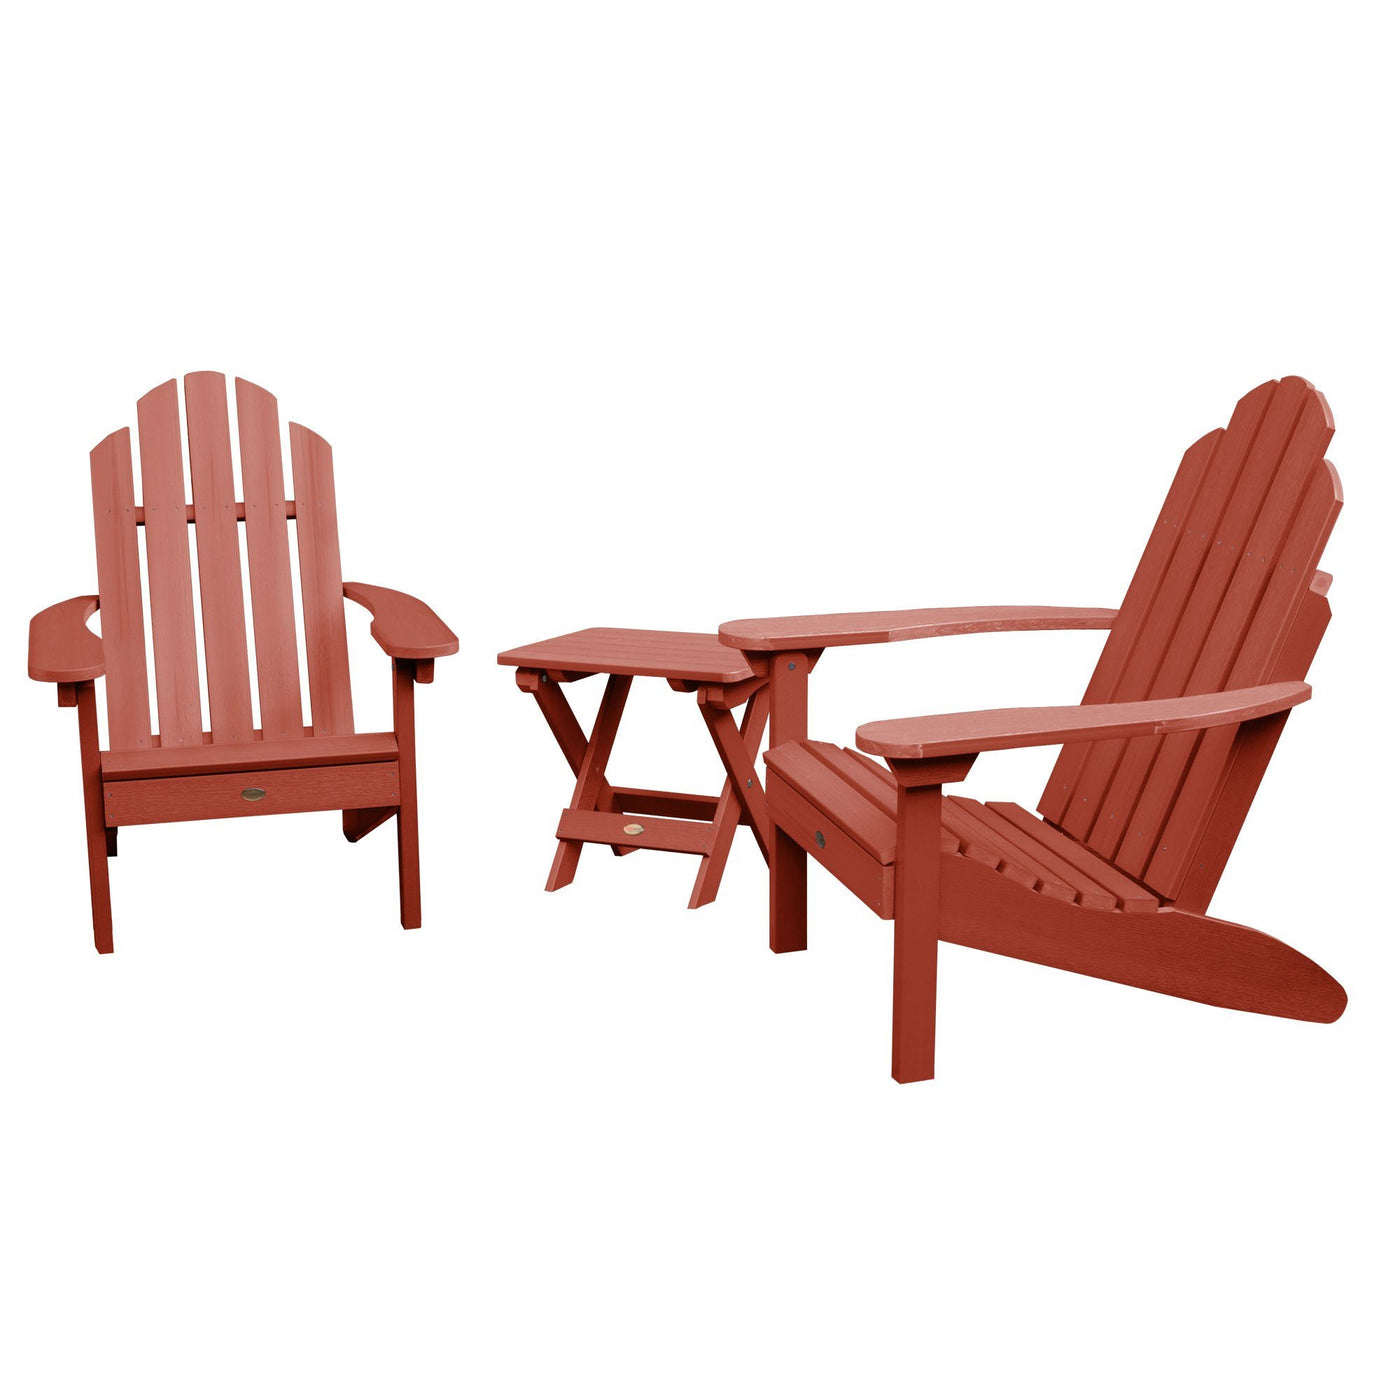 2 Classic Westport Adirondack Chairs with 1 Adirondack Folding Side Table Highwood USA Rustic Red 